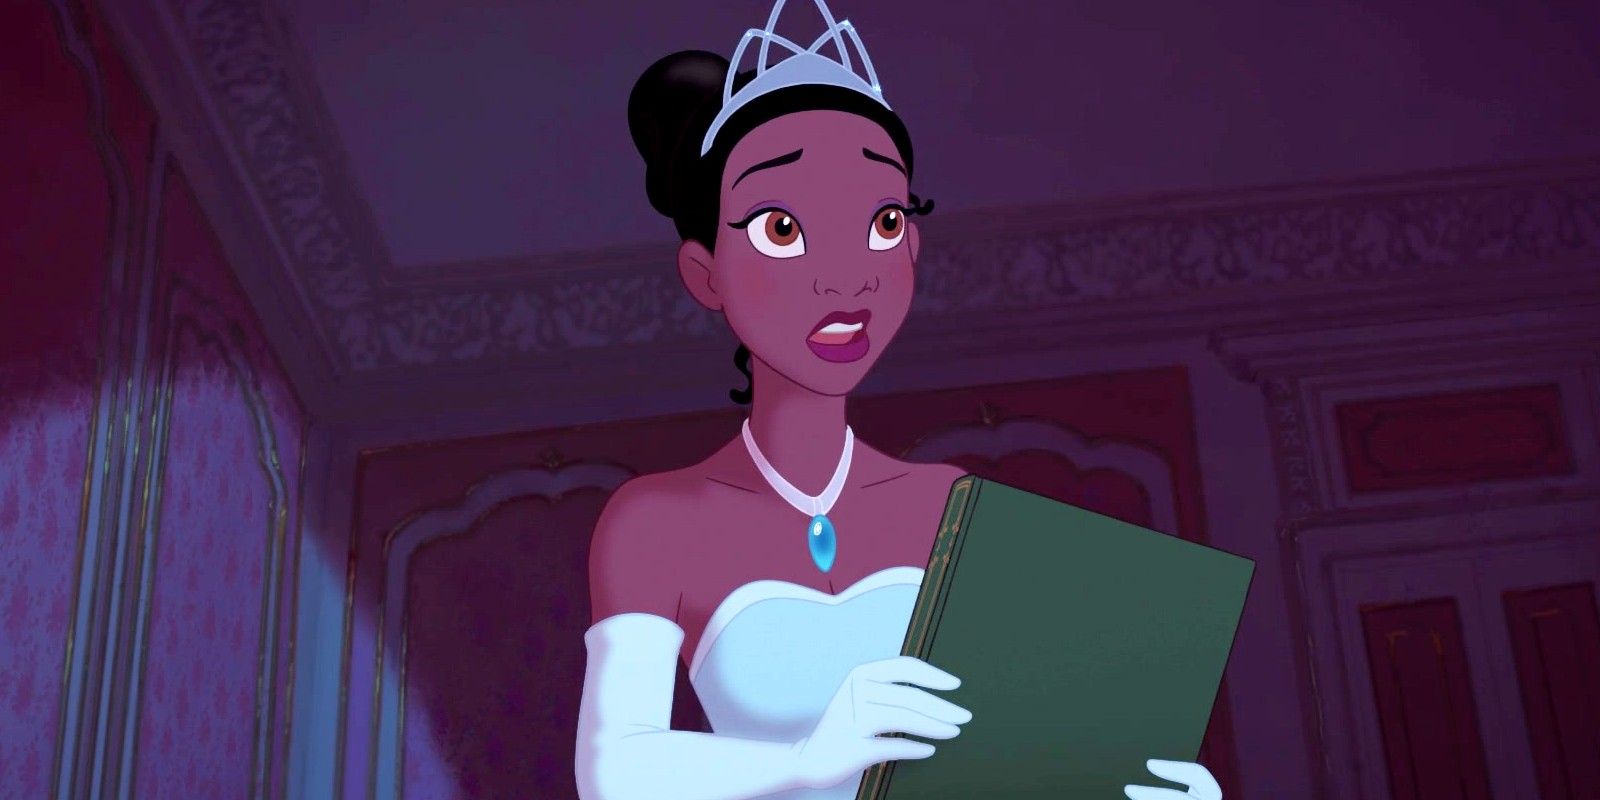 Disney+'s Princess & The Frog Show Tiana Gets Development Update 3 Years  After Being Announced